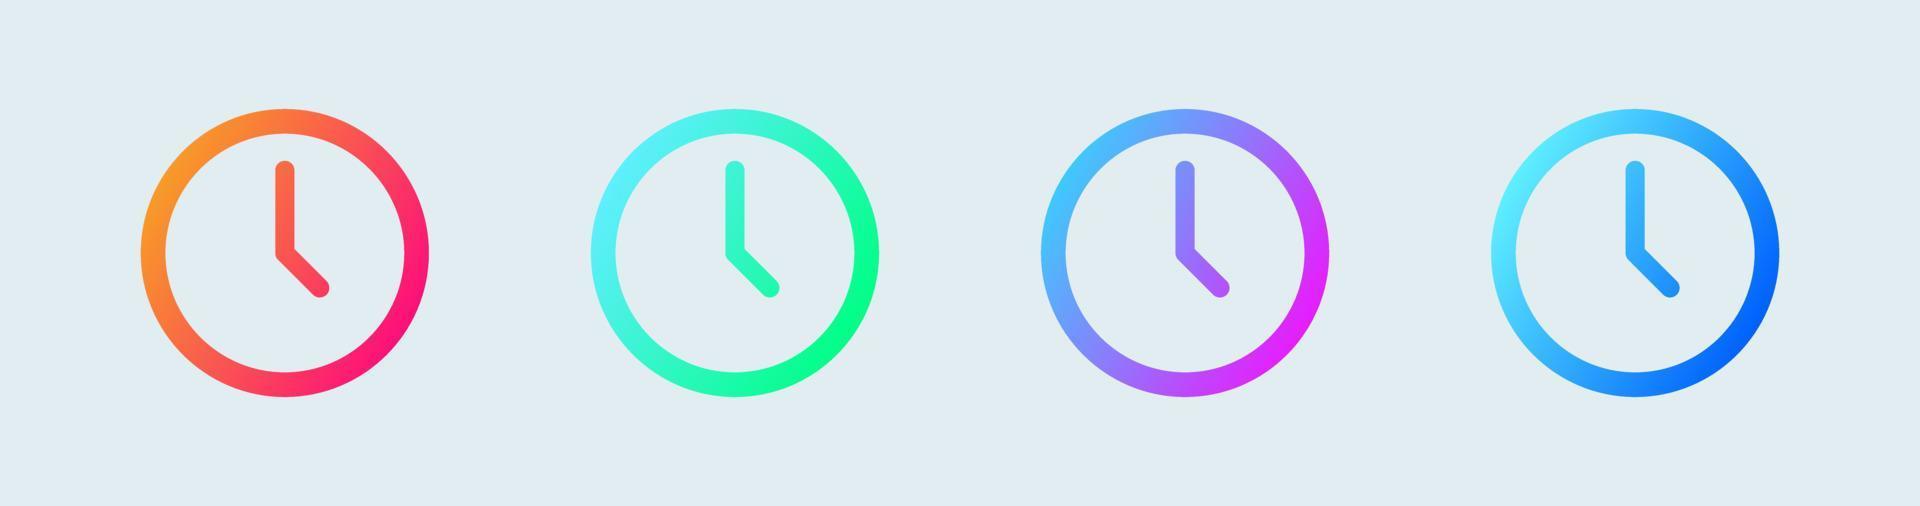 Clock icon set in gradient colors. Watch icon collection design. vector